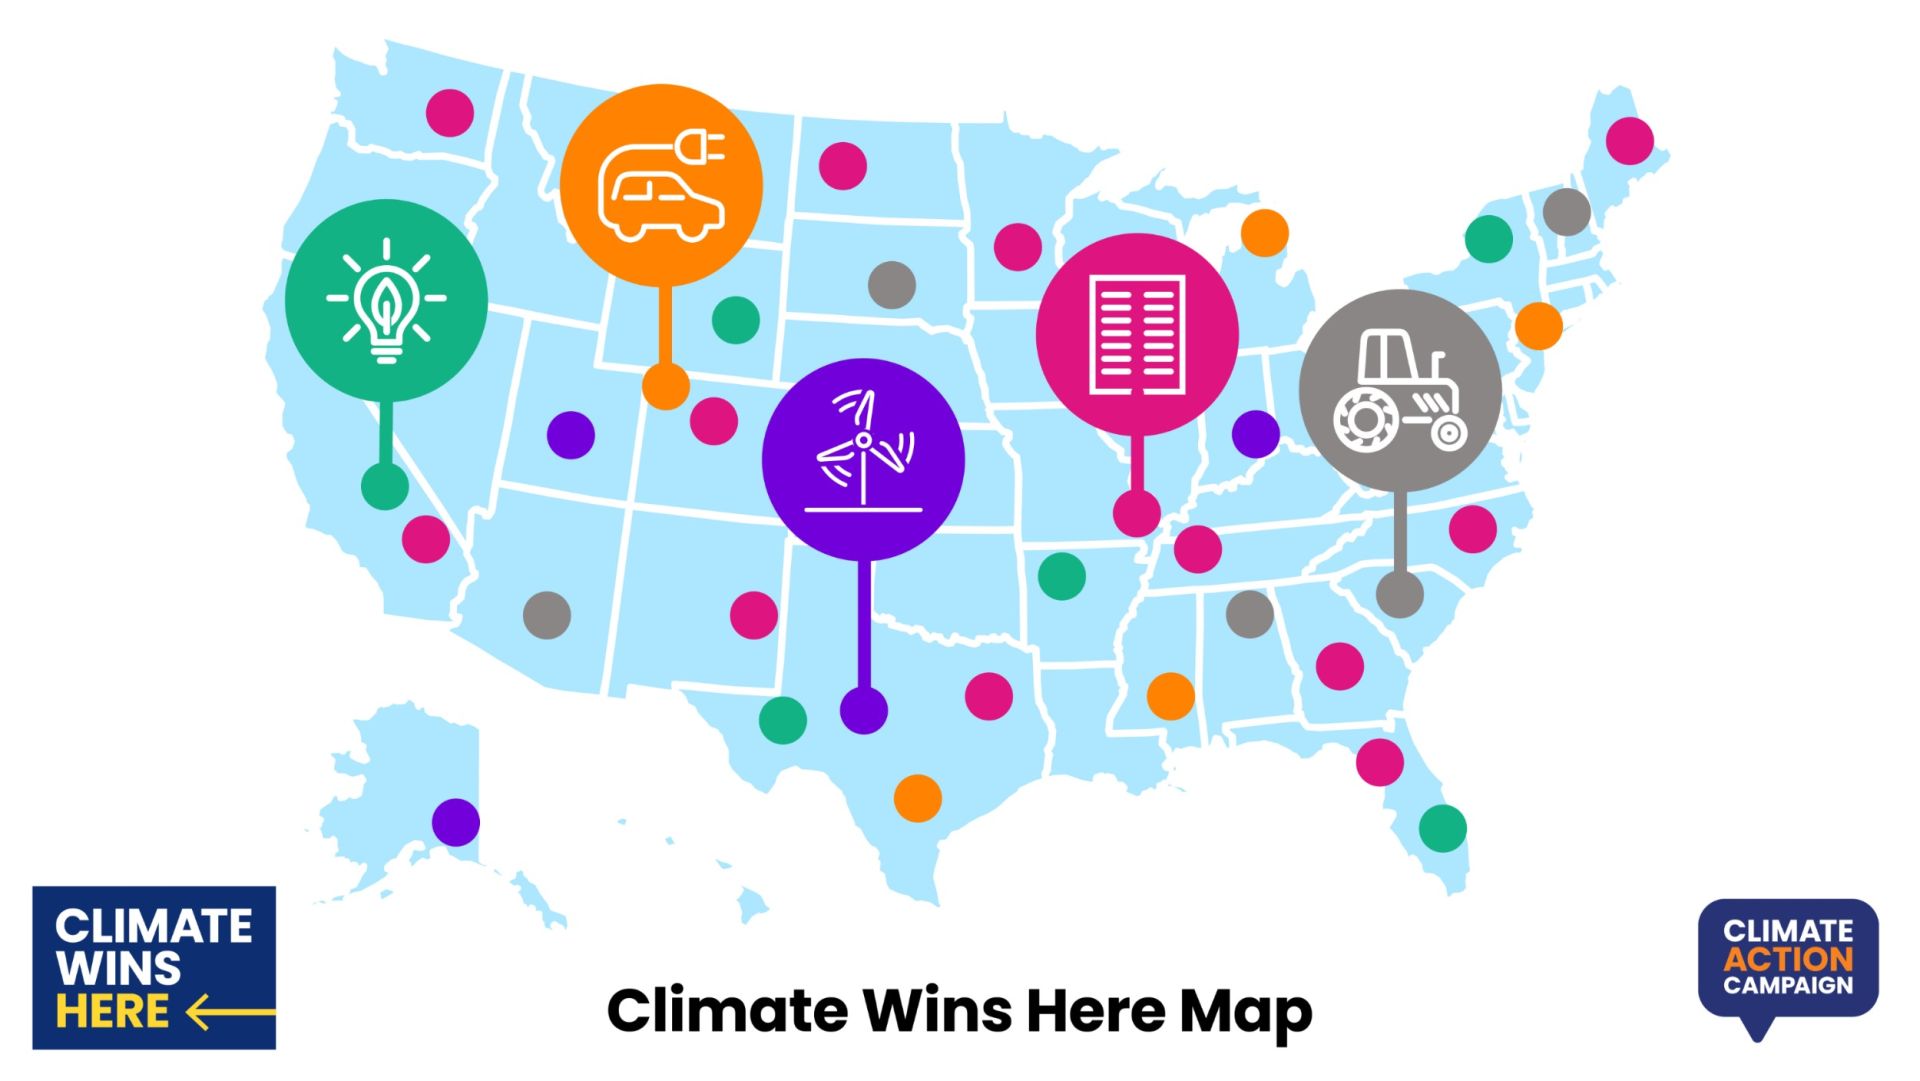 Image of the CAC Climate Wins Here Map